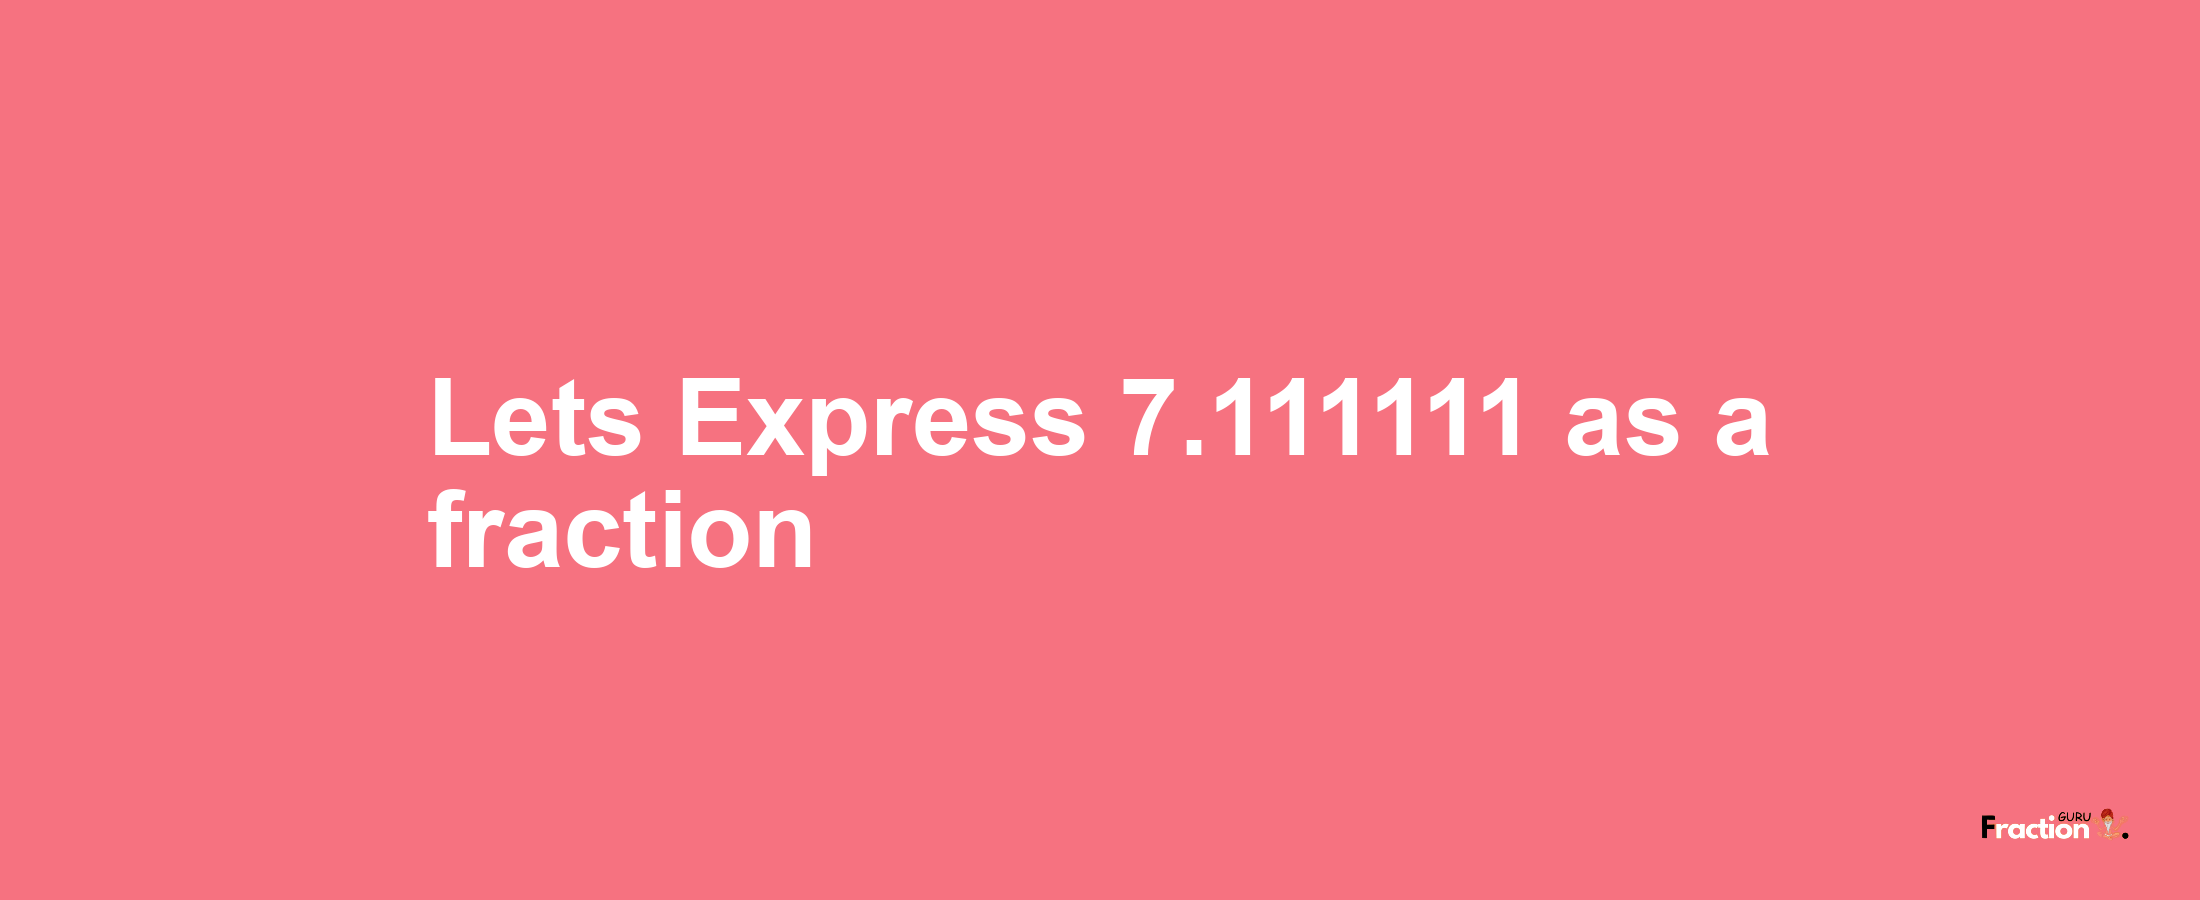 Lets Express 7.111111 as afraction